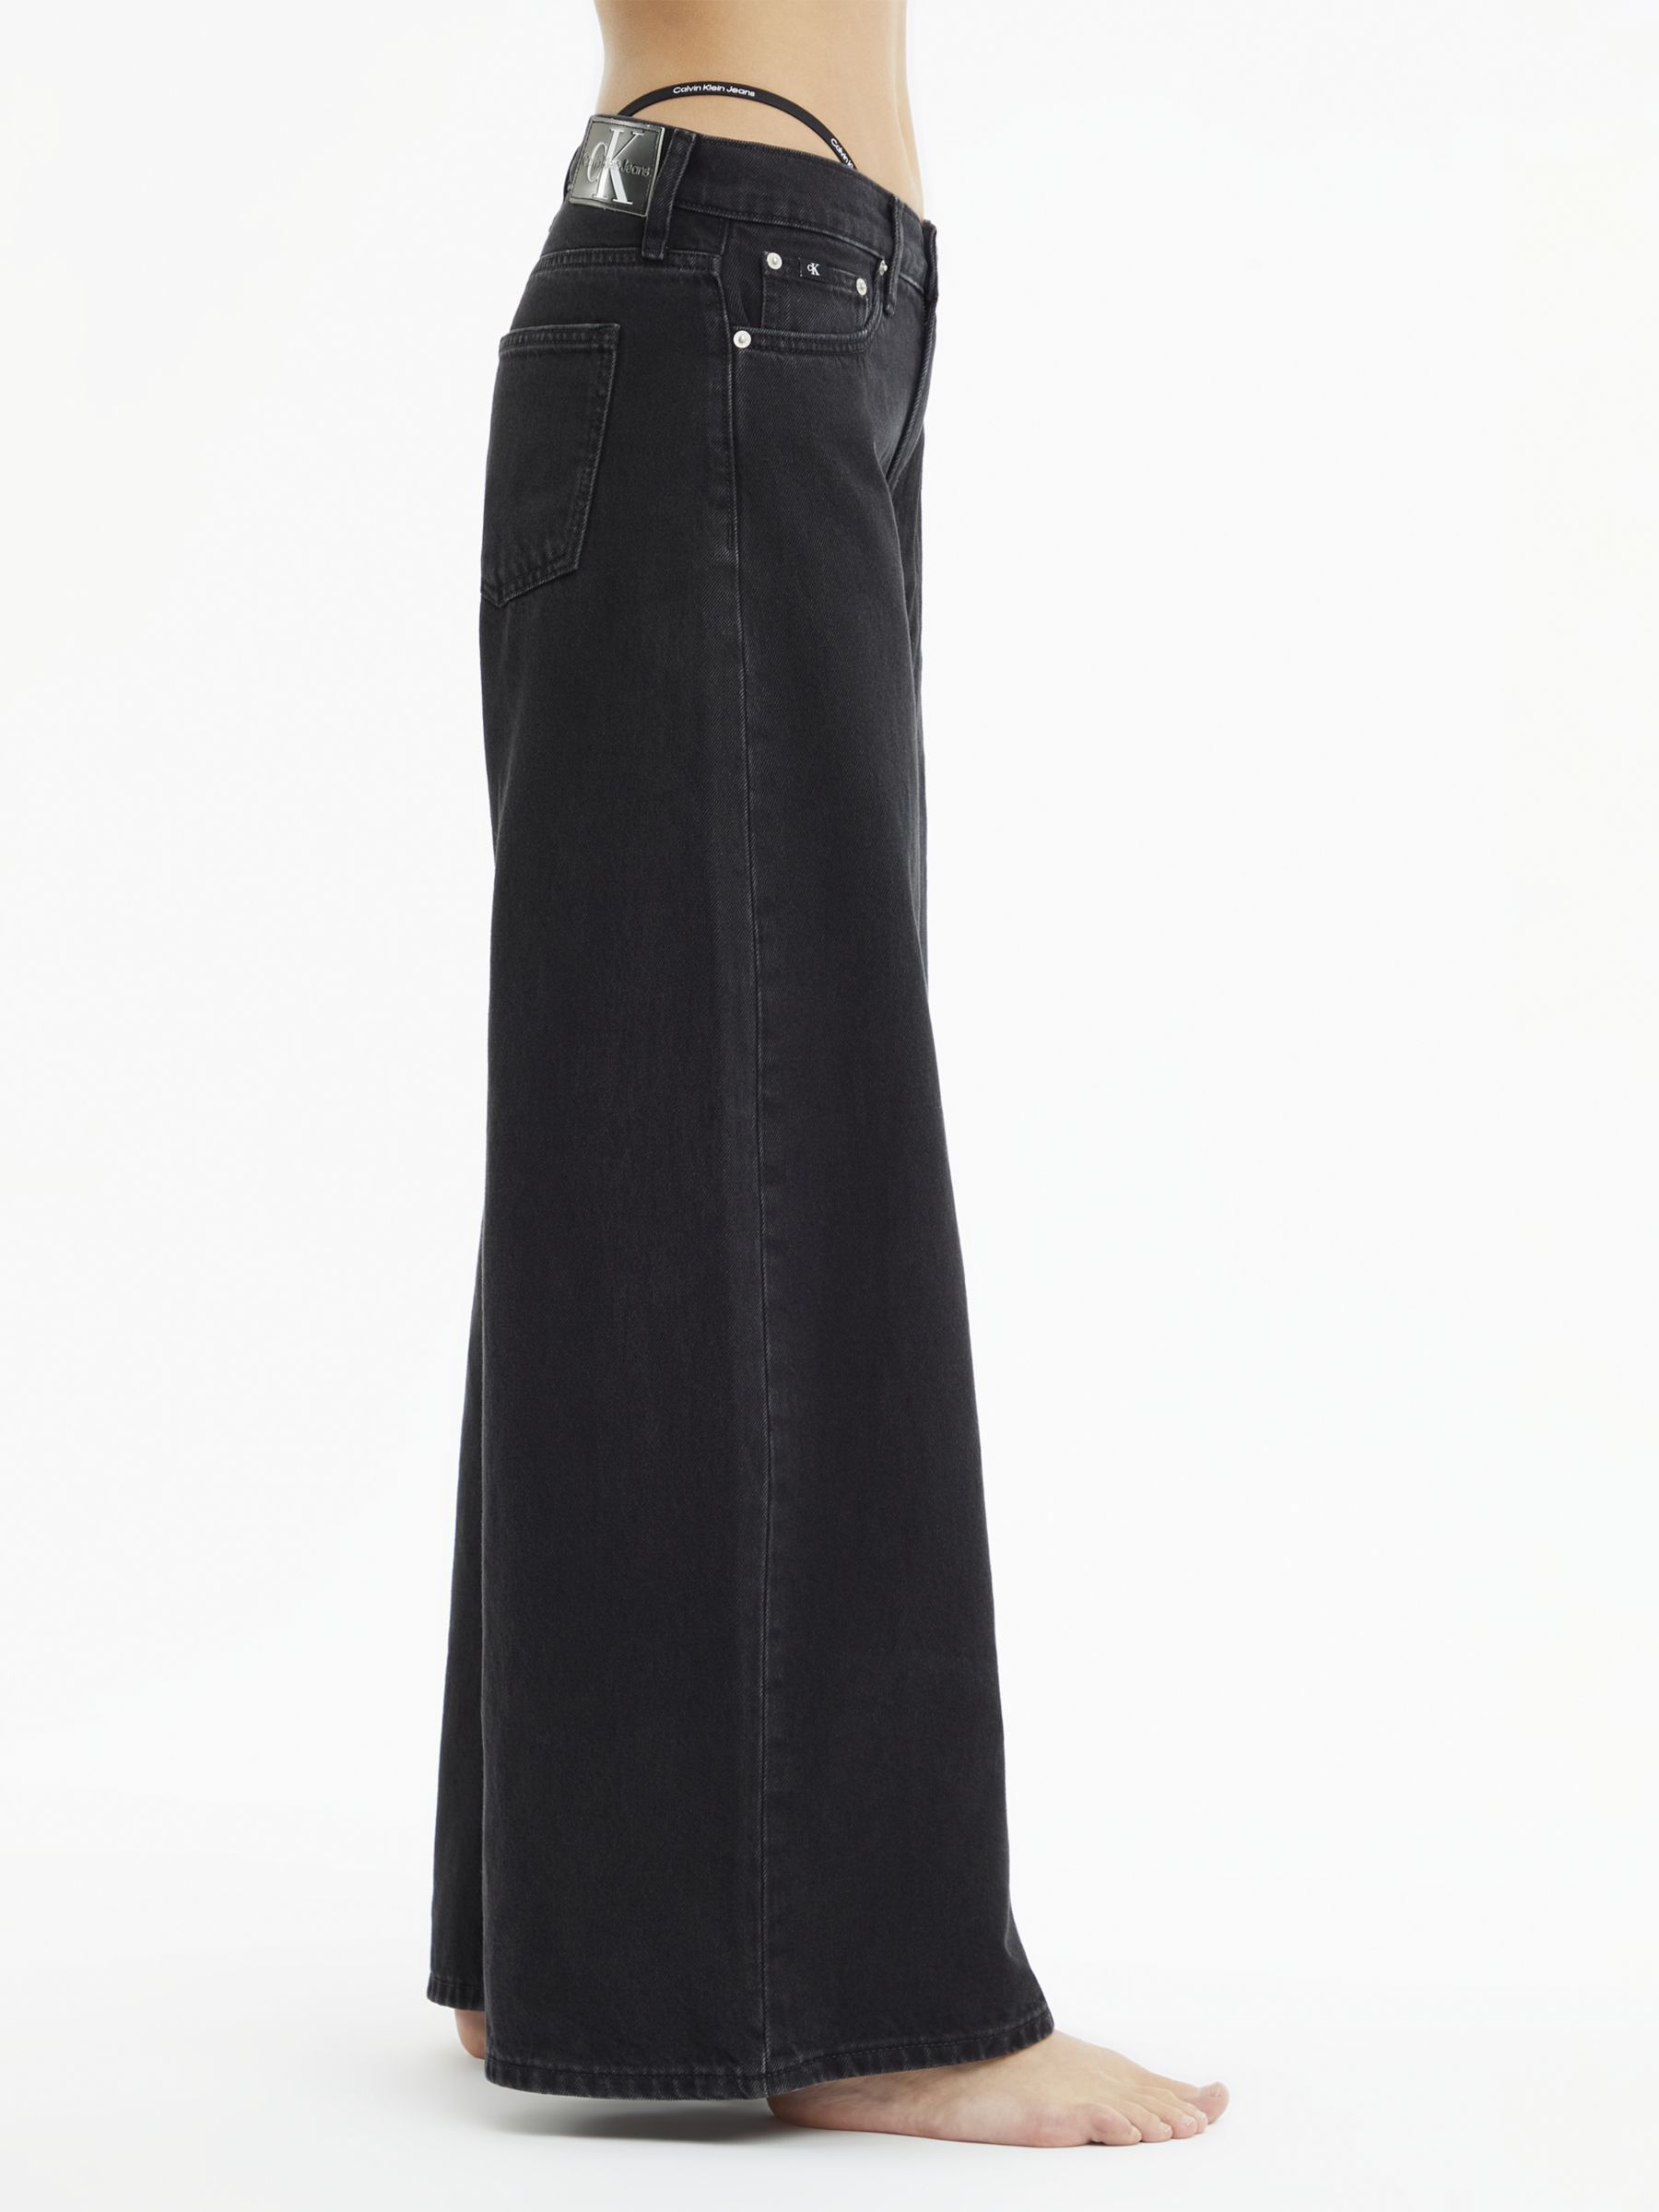 Buy Calvin Klein Low Rise Relaxed Jeans, Black Online at johnlewis.com